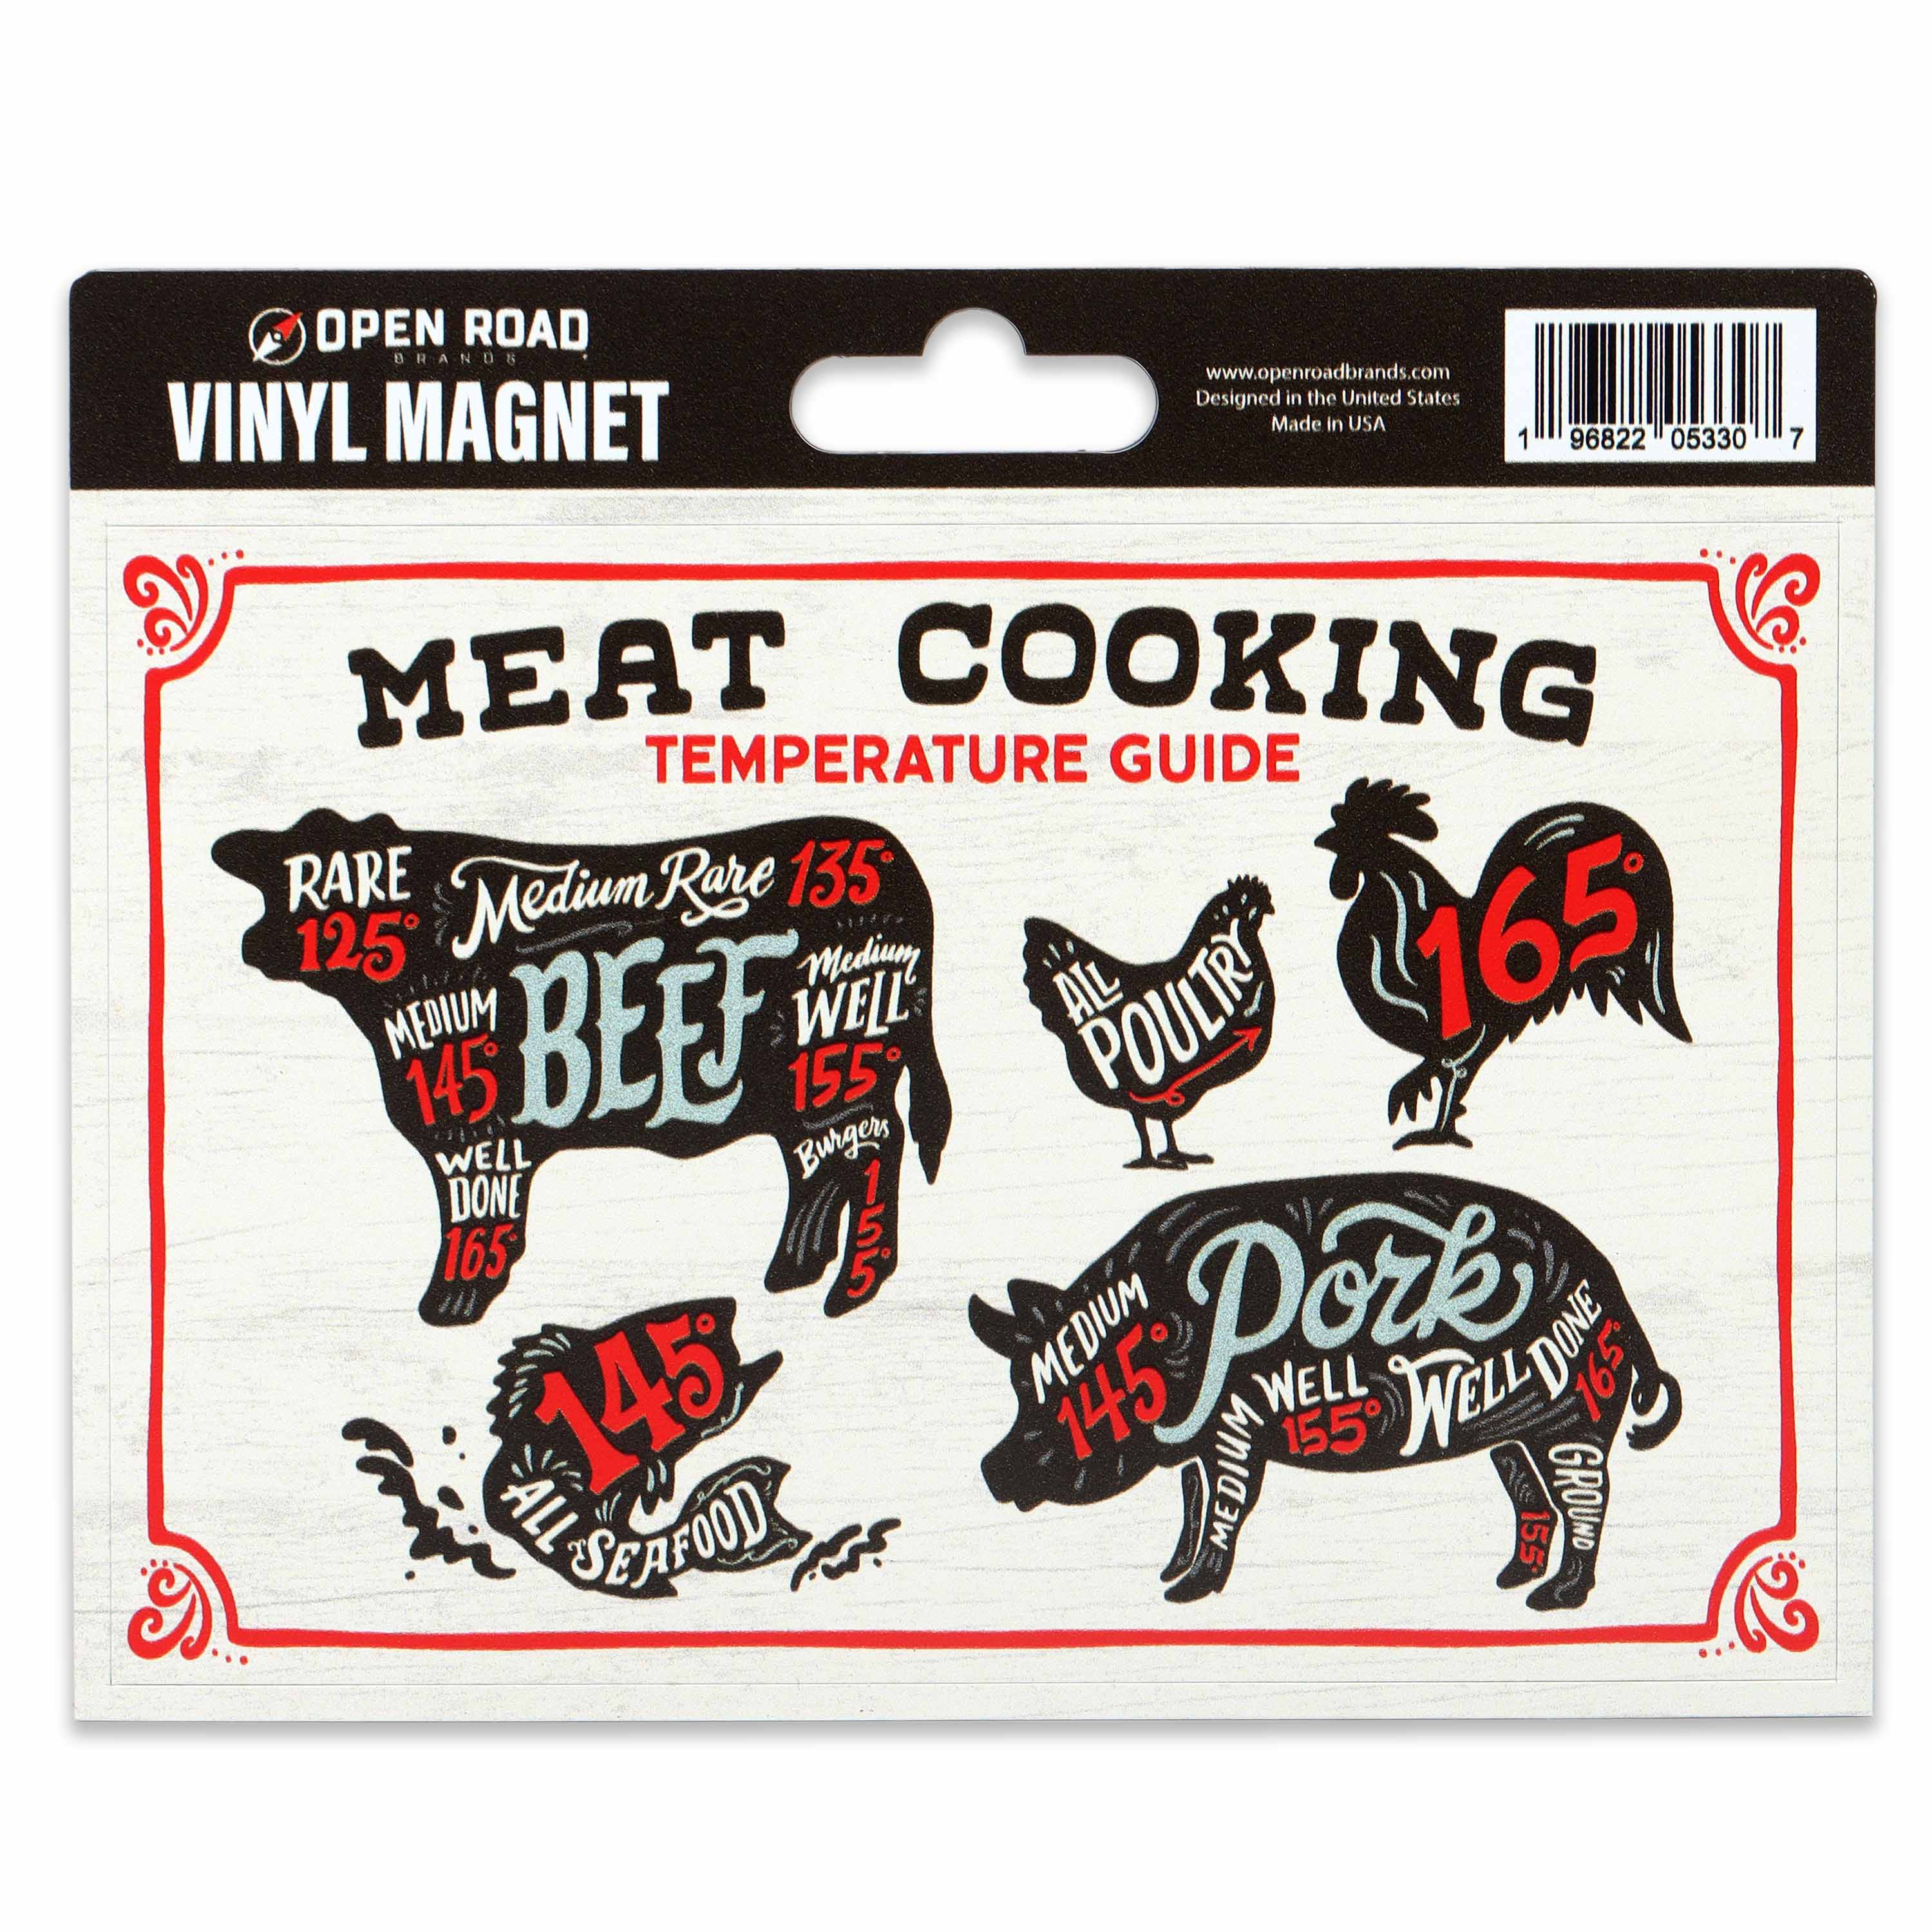 Open Road's Cooking Meat Magnet